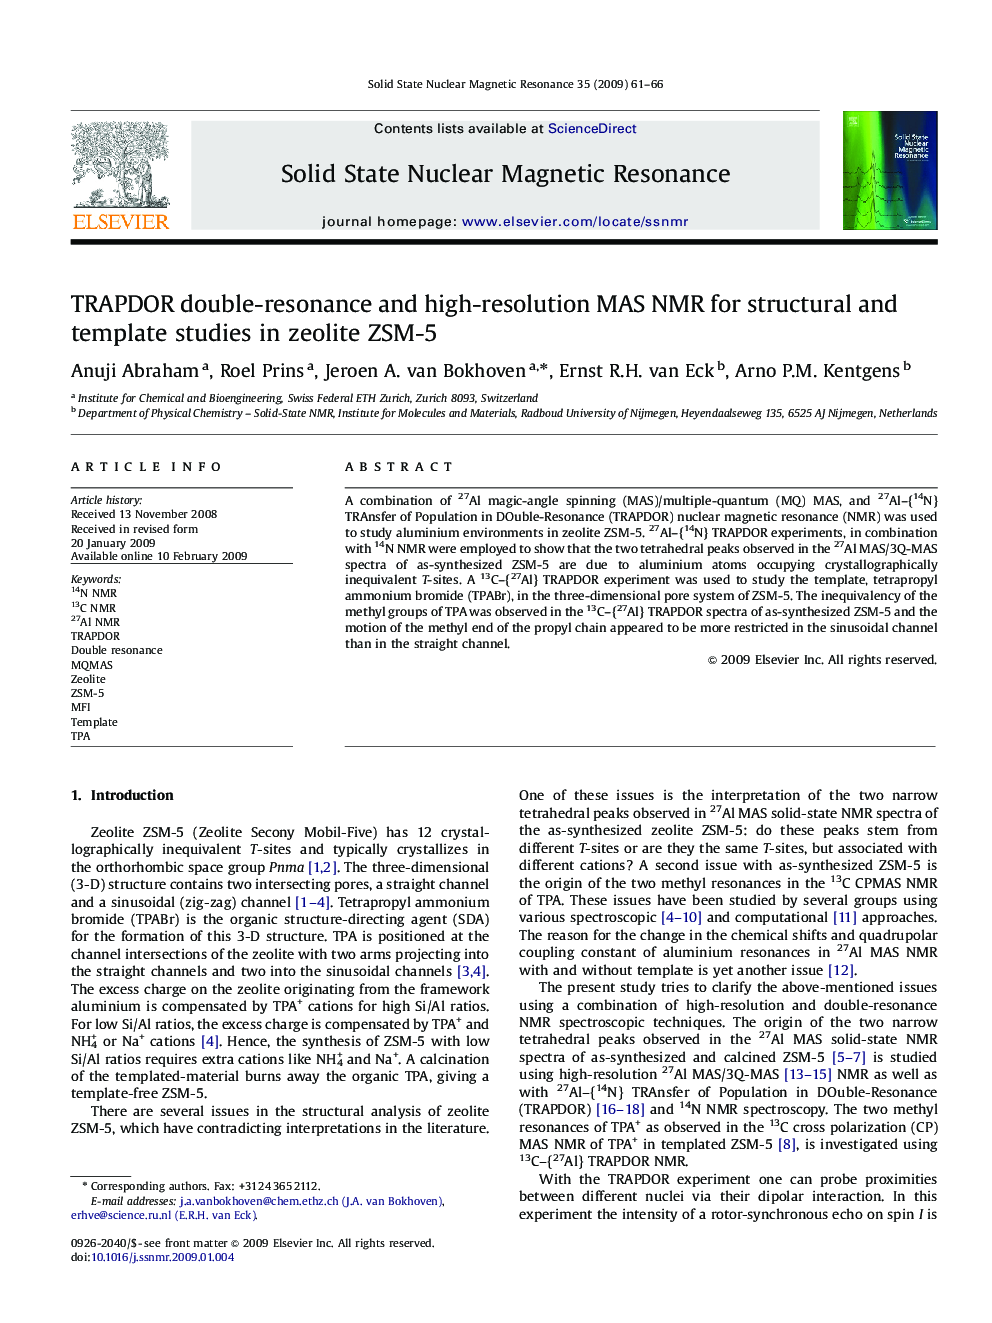 TRAPDOR double-resonance and high-resolution MAS NMR for structural and template studies in zeolite ZSM-5